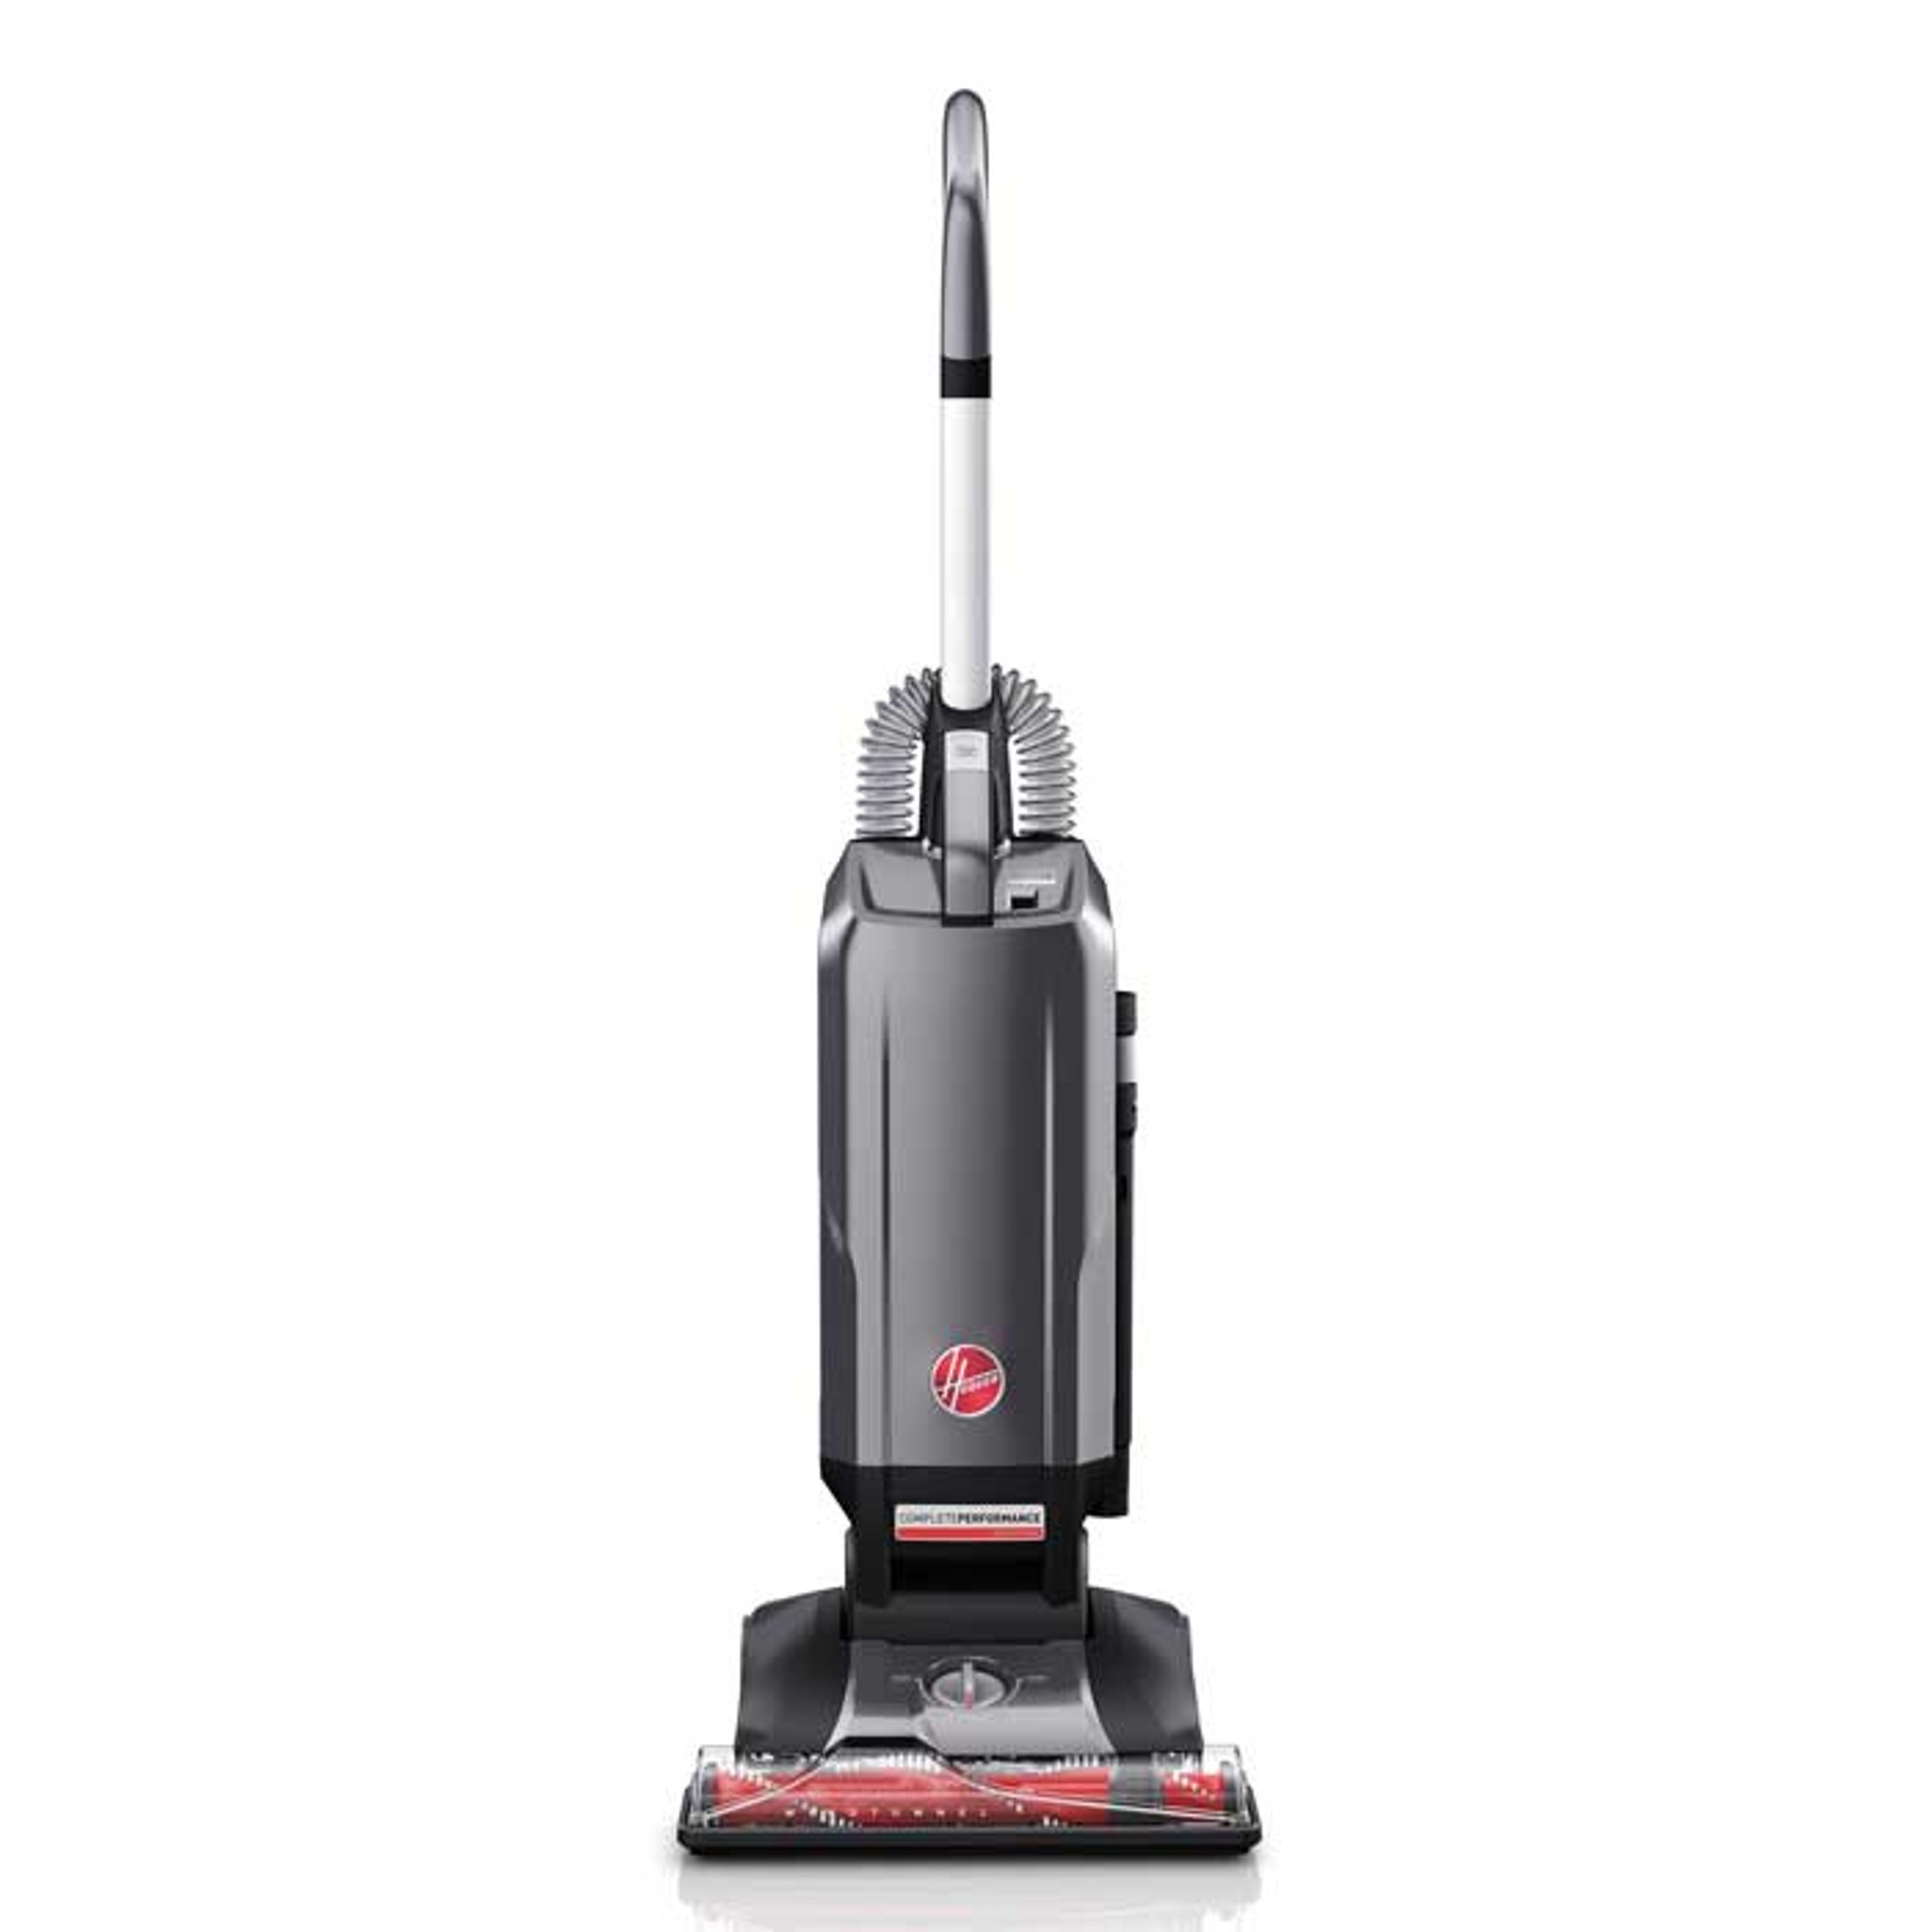 Hoover WindTunnel 2 High Capacity Bagless Upright Vacuum Cleaner   Canadian Tire